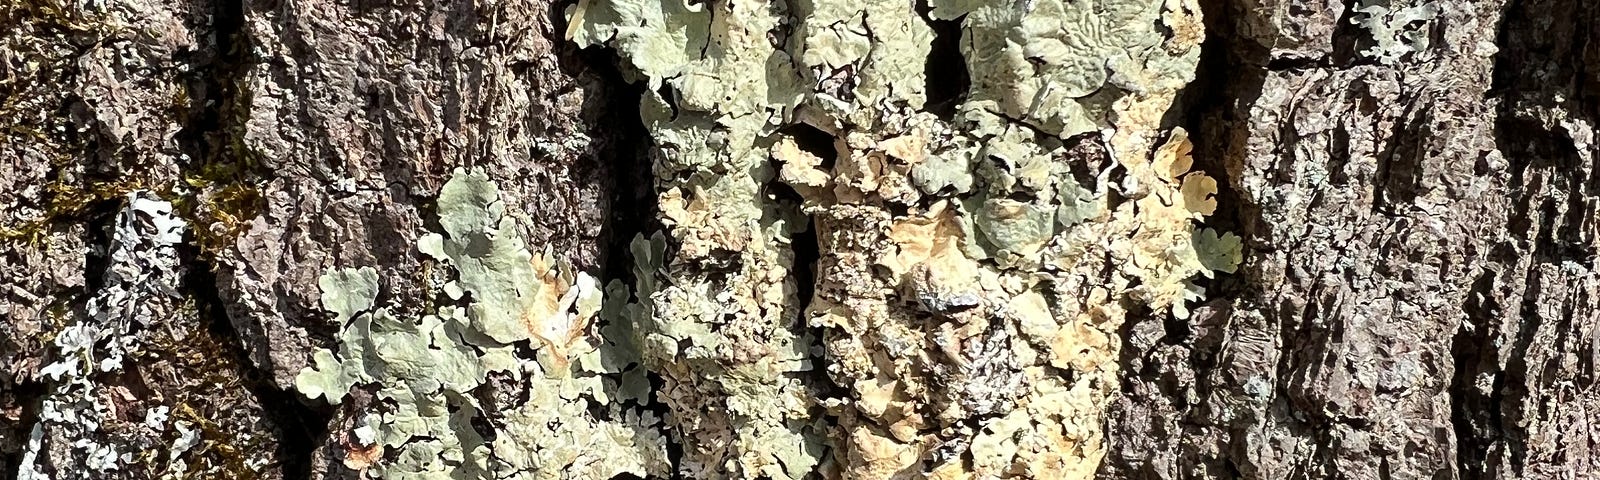 Photo of a patch of green-grey lichen on rough grey oak bark at Haley Farm State Park, Groton, CT.